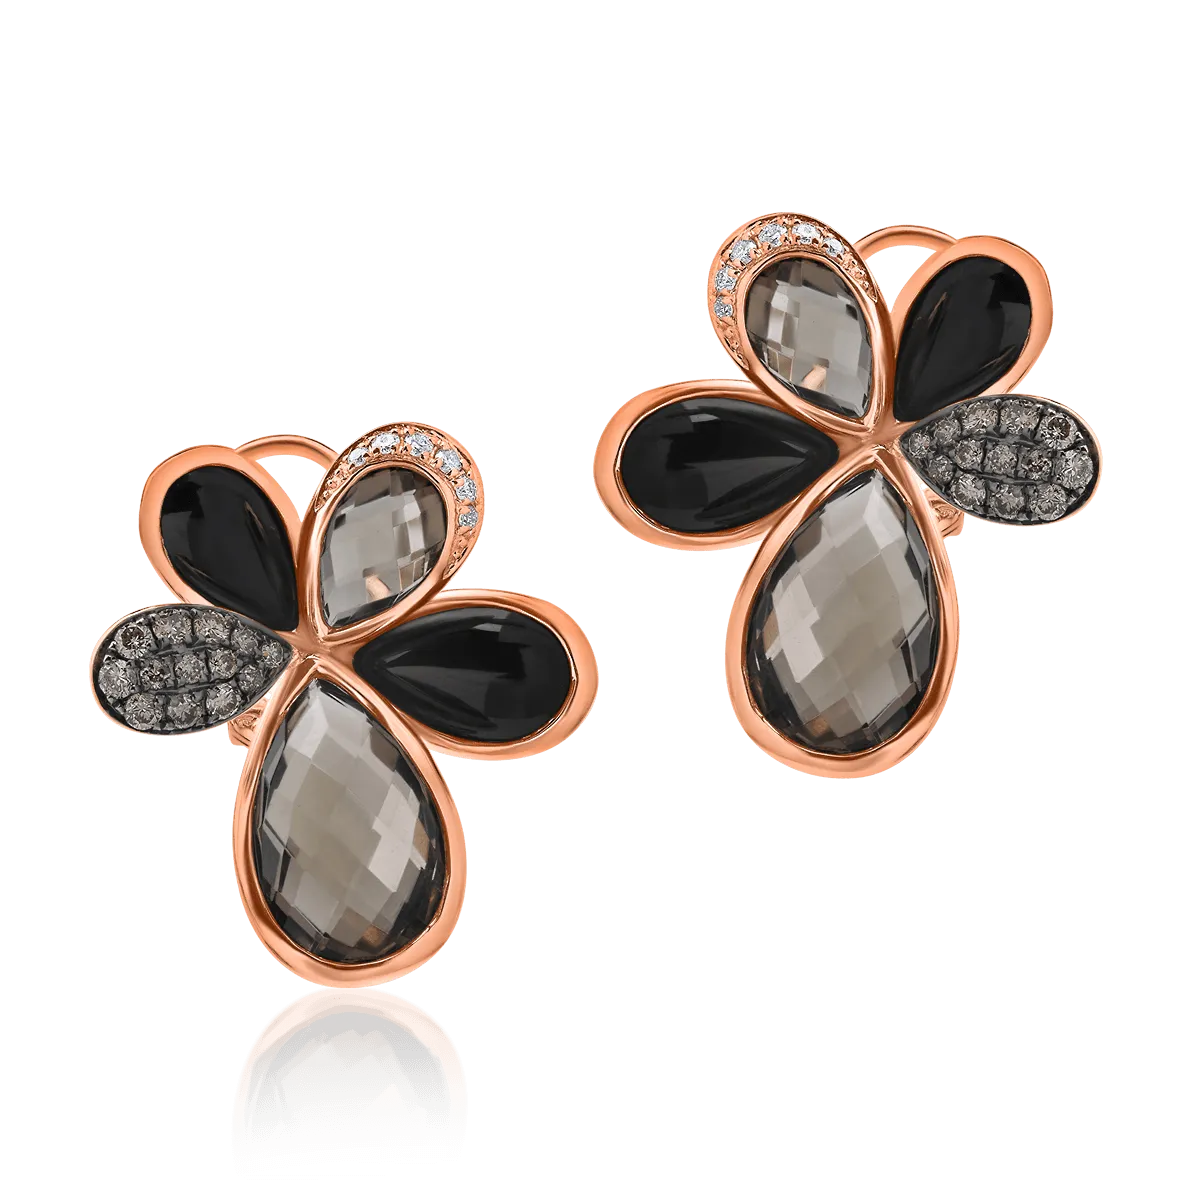 18K rose gold earrings with 13.96ct precious and semi-precious stones